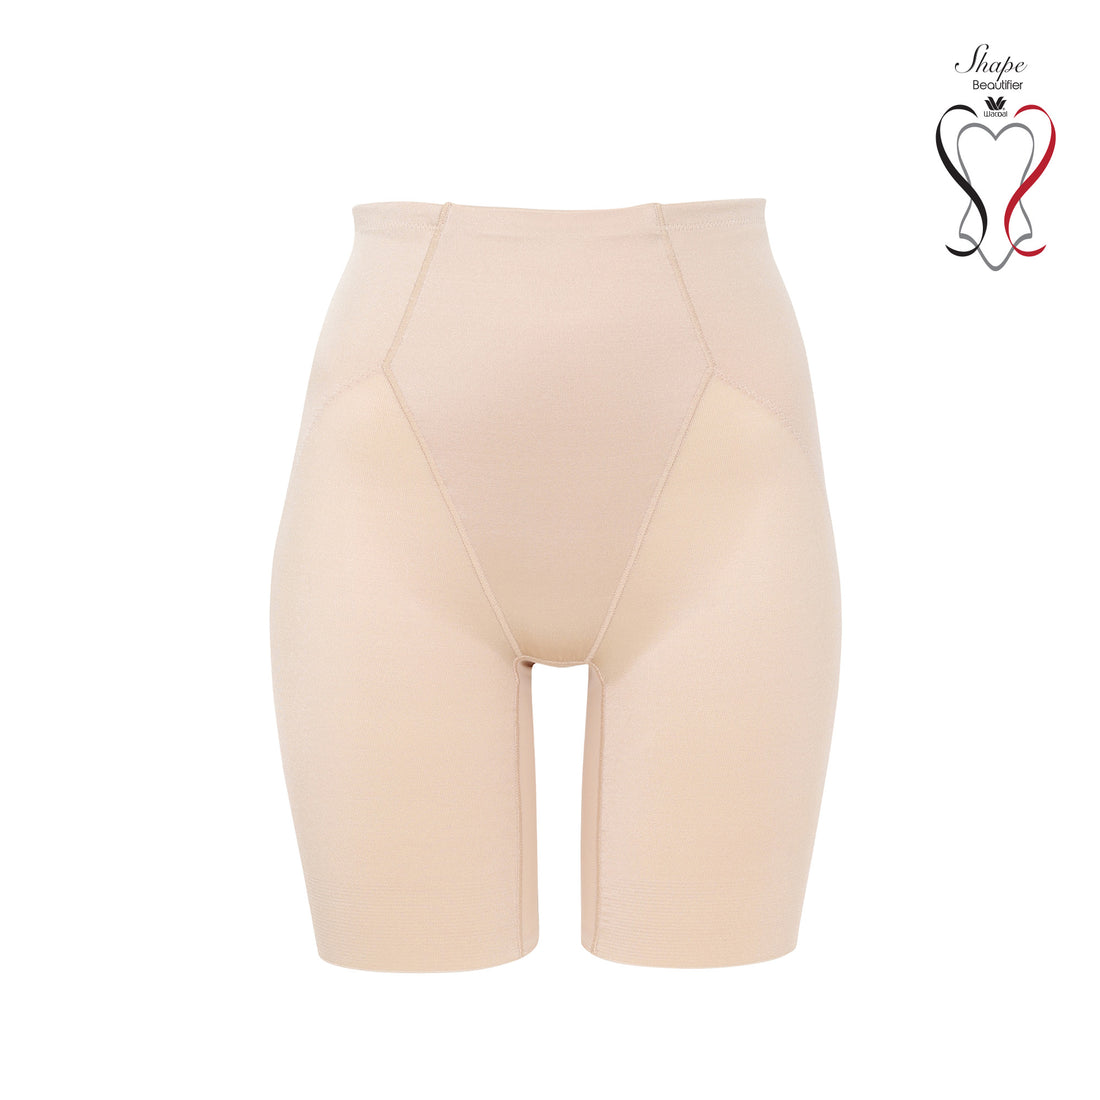 Wacoal Shapewear STAY Slimming pants for abdomen, hips and thighs, mod –  Thai Wacoal Public Company Limited